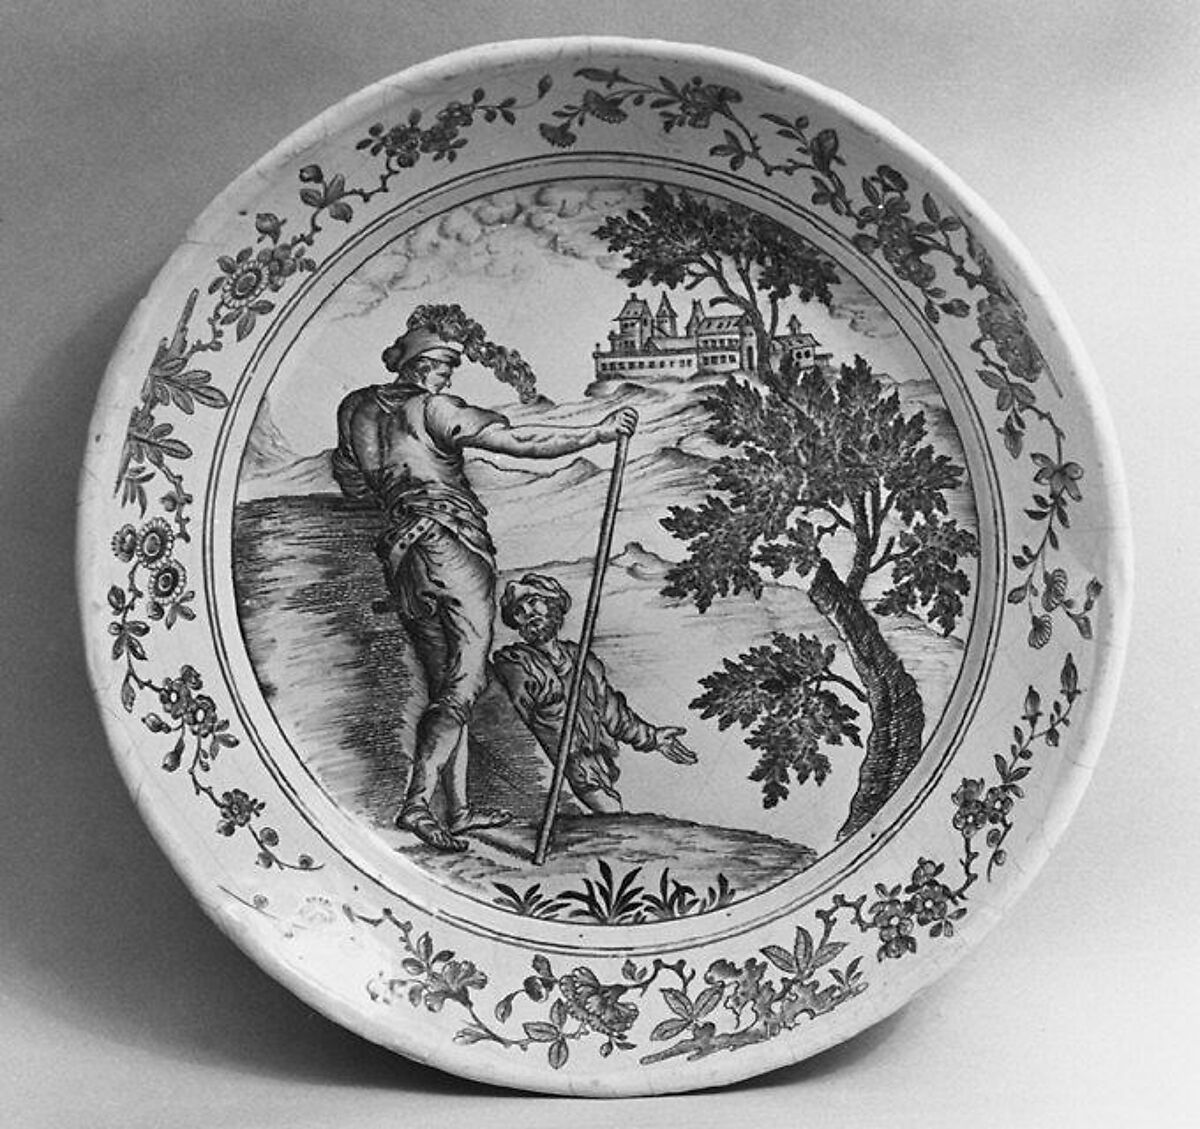 Plate, After an etching by Salvator Rosa (Italian, Arenella (Naples) 1615–1673 Rome), Faience (tin-glazed earthenware), French, Sinceny 